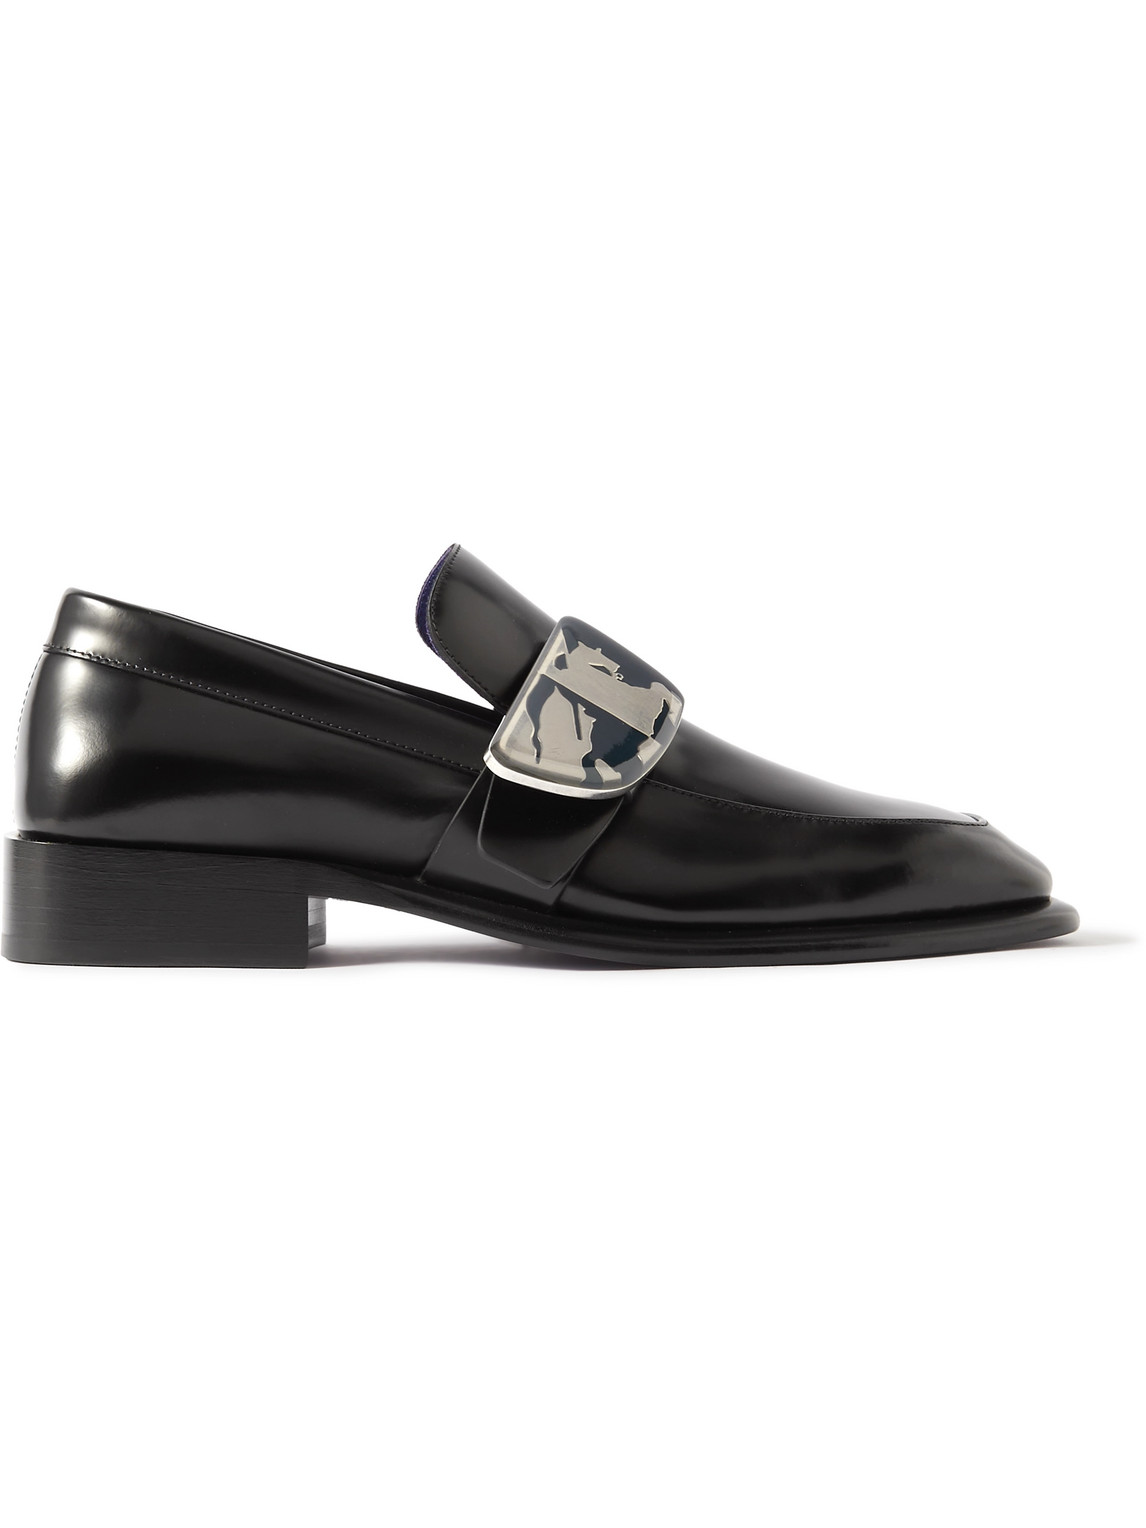 Burberry Embellished Leather Monk-strap Shoes In Black